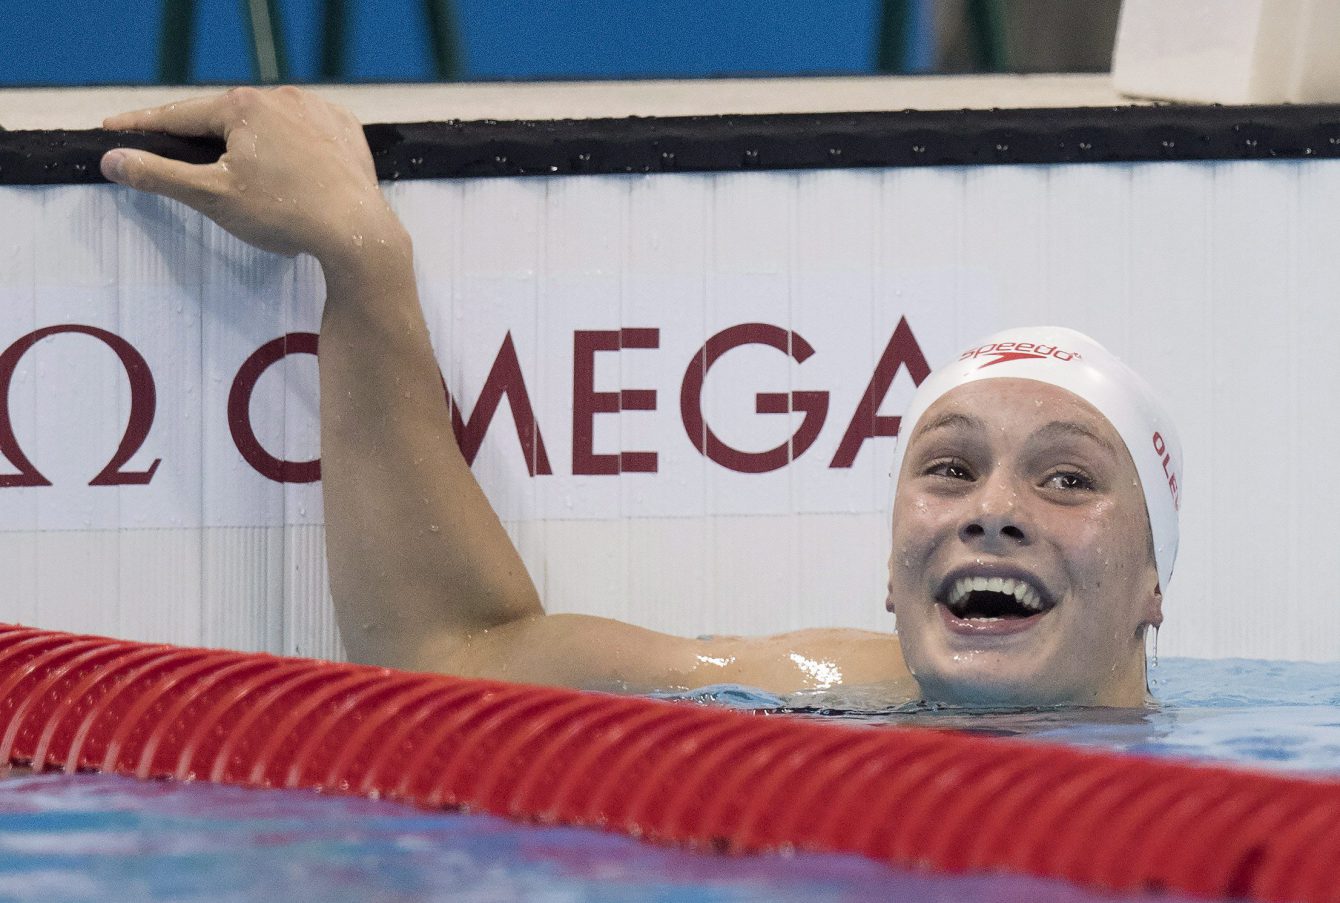 Canada's Penny Oleksiak reacts to her silver medal performance in the women's 100-metre butterfly at the 2016 Summer Olympics on Sunday, August 7, 2016 in Rio de Janeiro, Brazil. THE CANADIAN PRESS/Frank Gunn